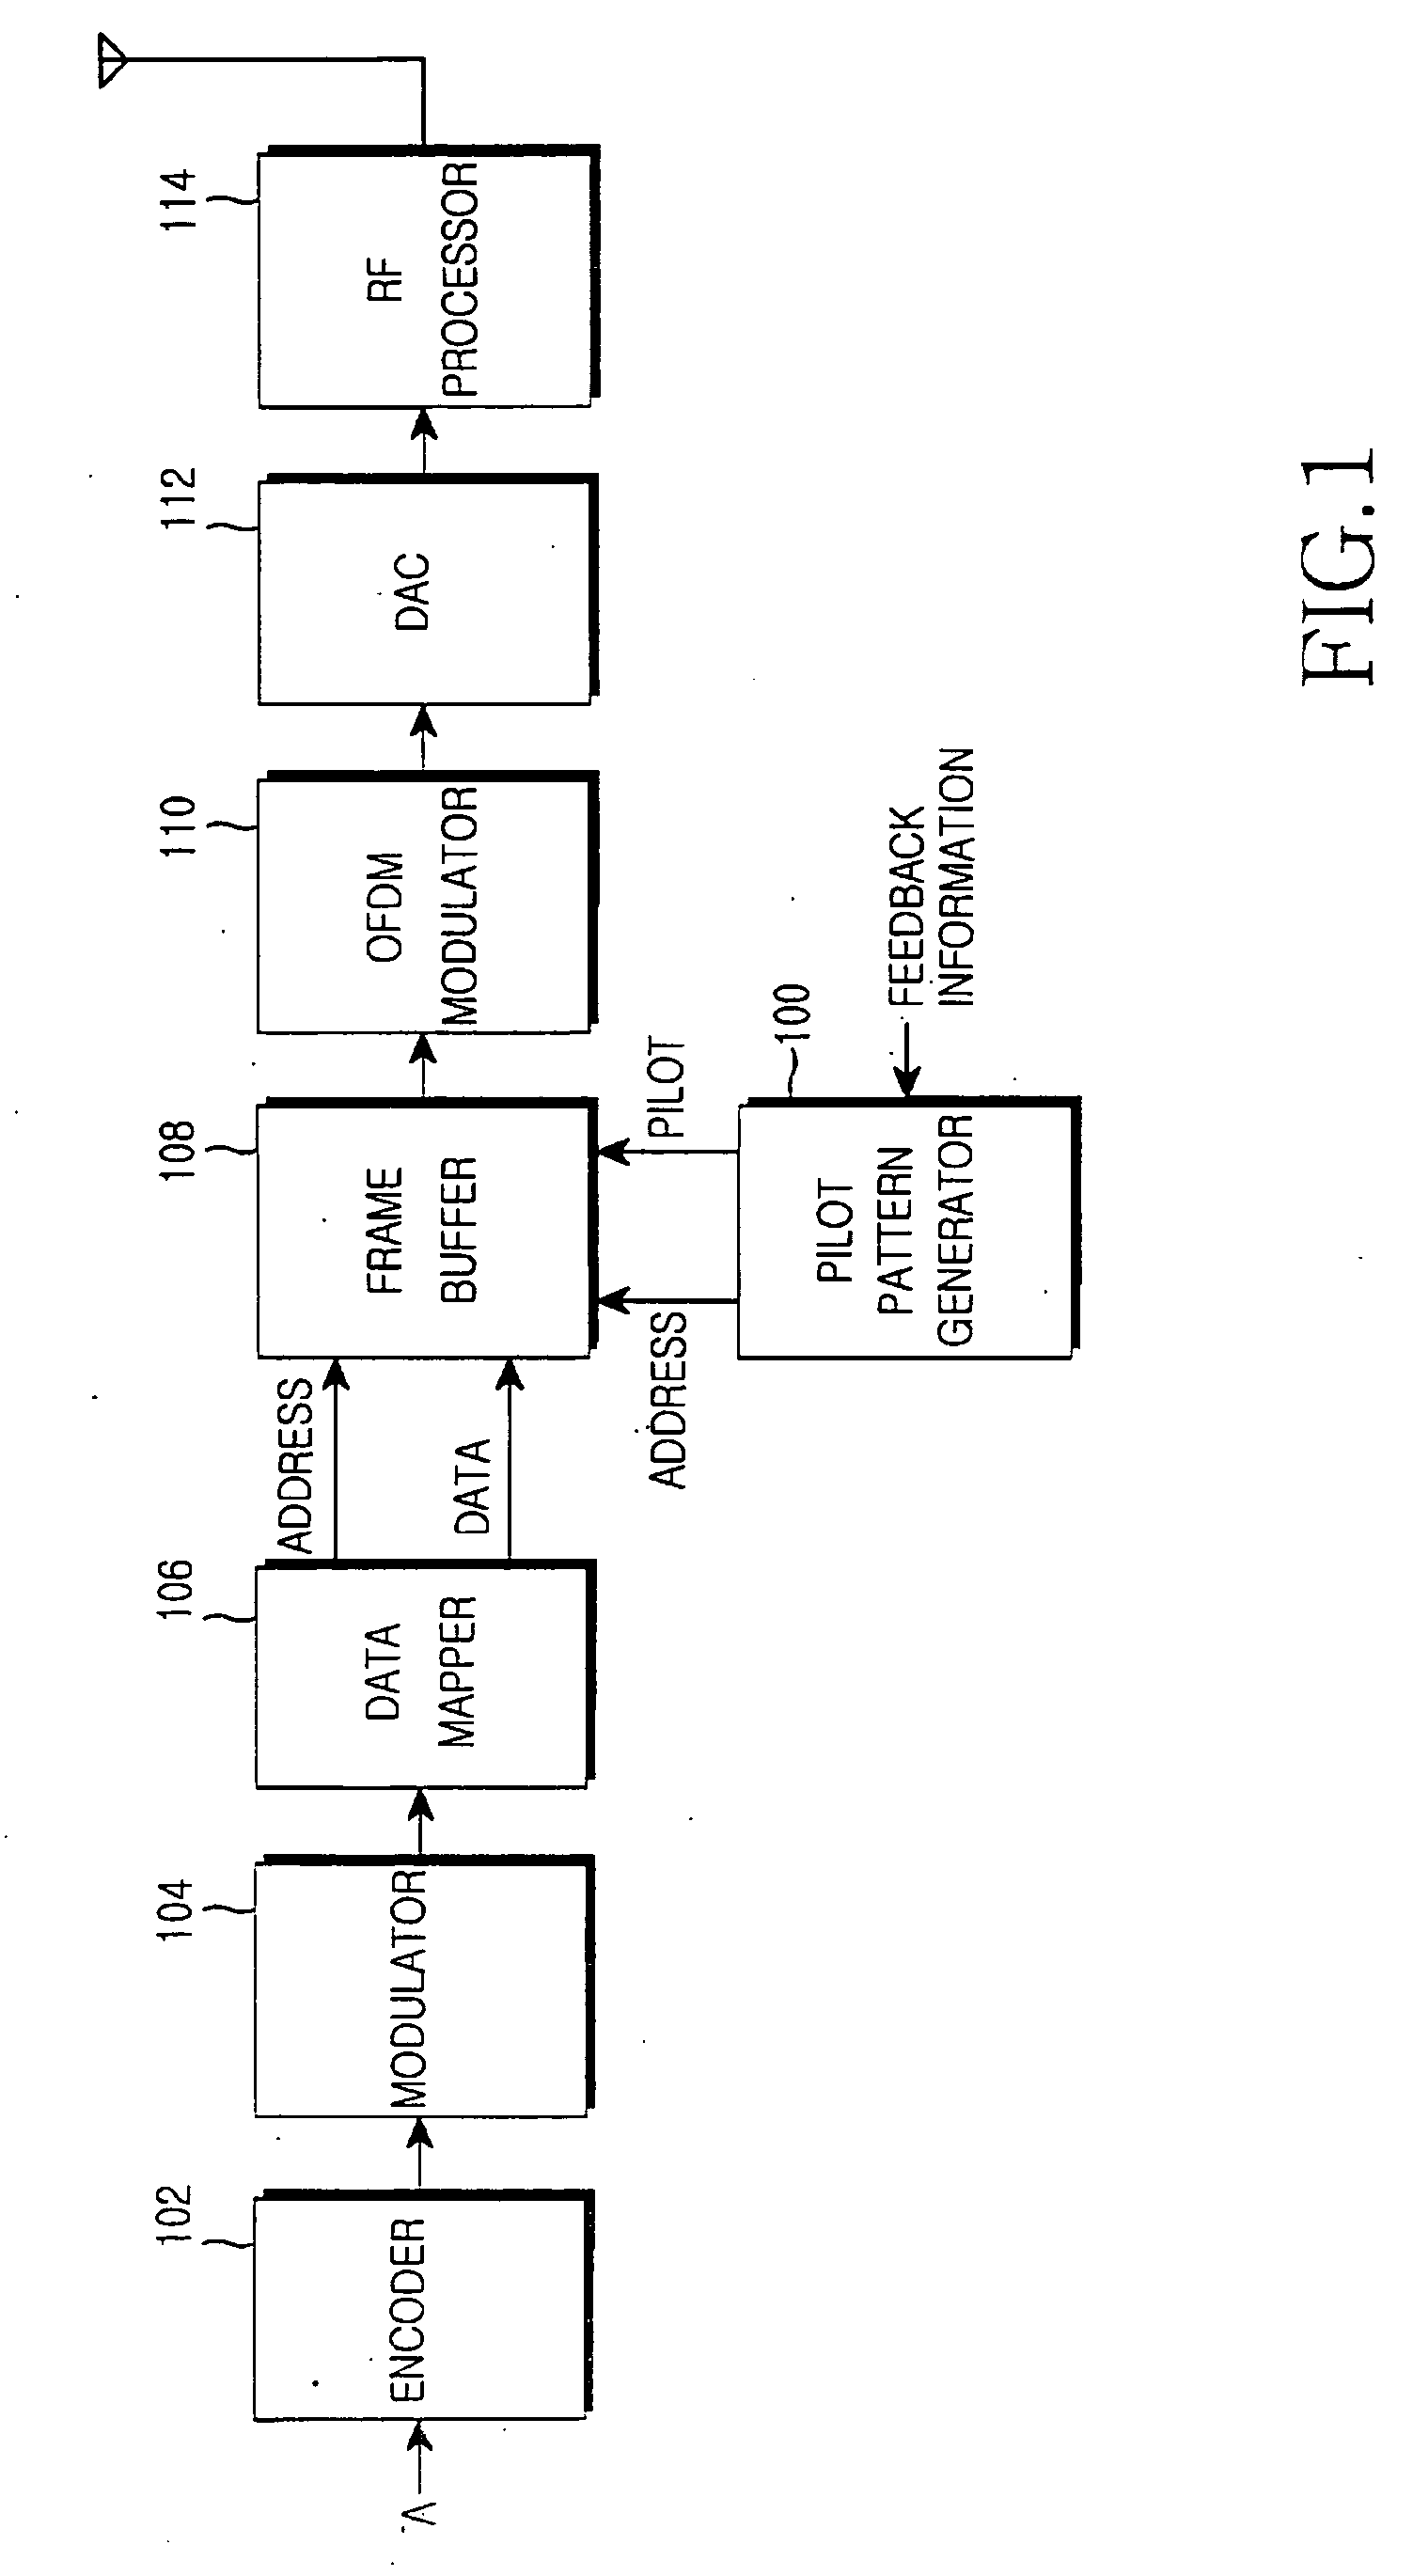 Apparatus and method for determining pilot pattern in a broadband wireless access communication system